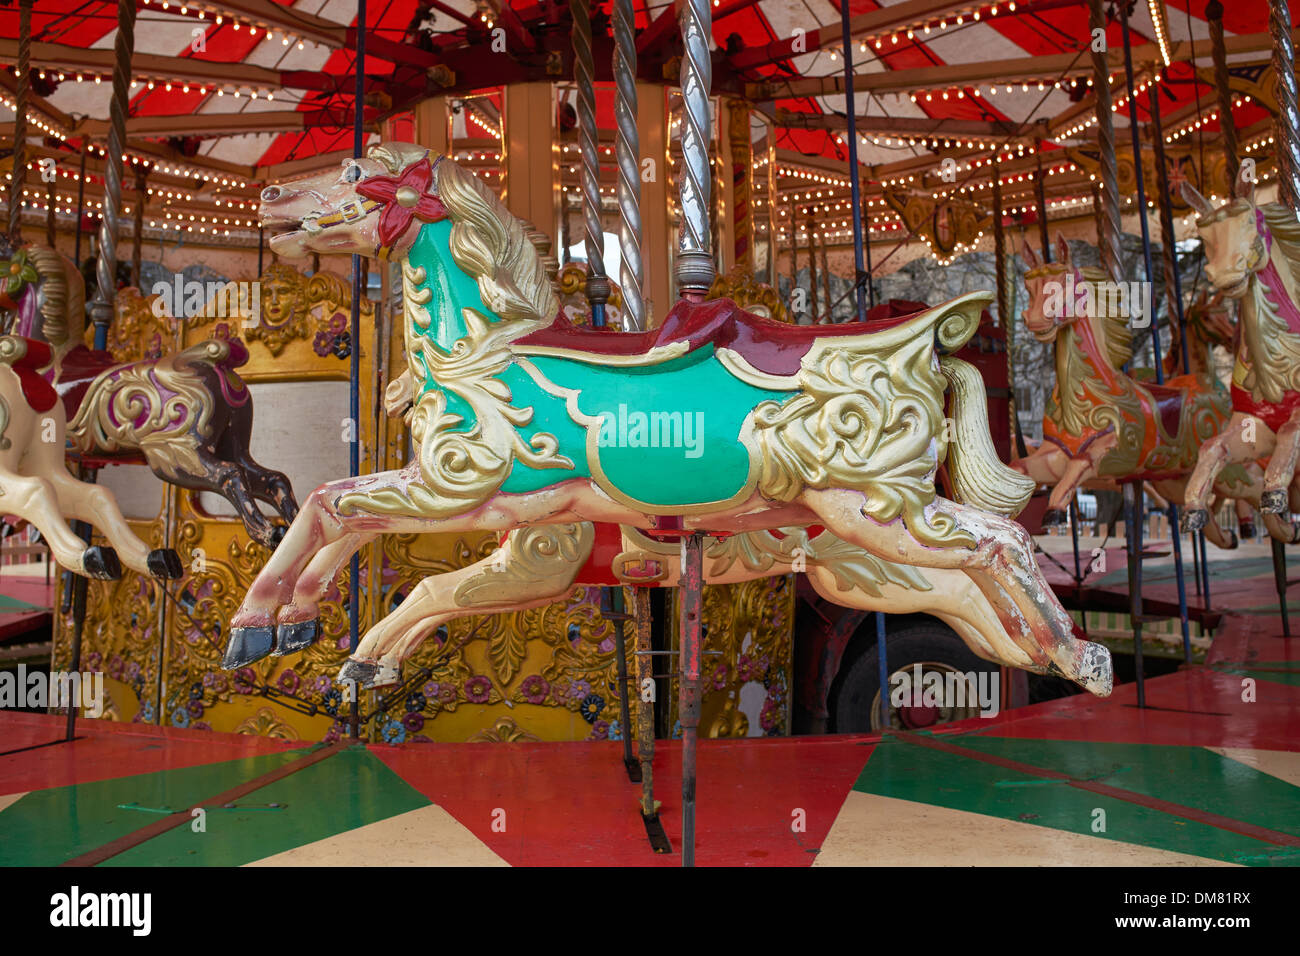 A horse on a merry go round Stock Photo